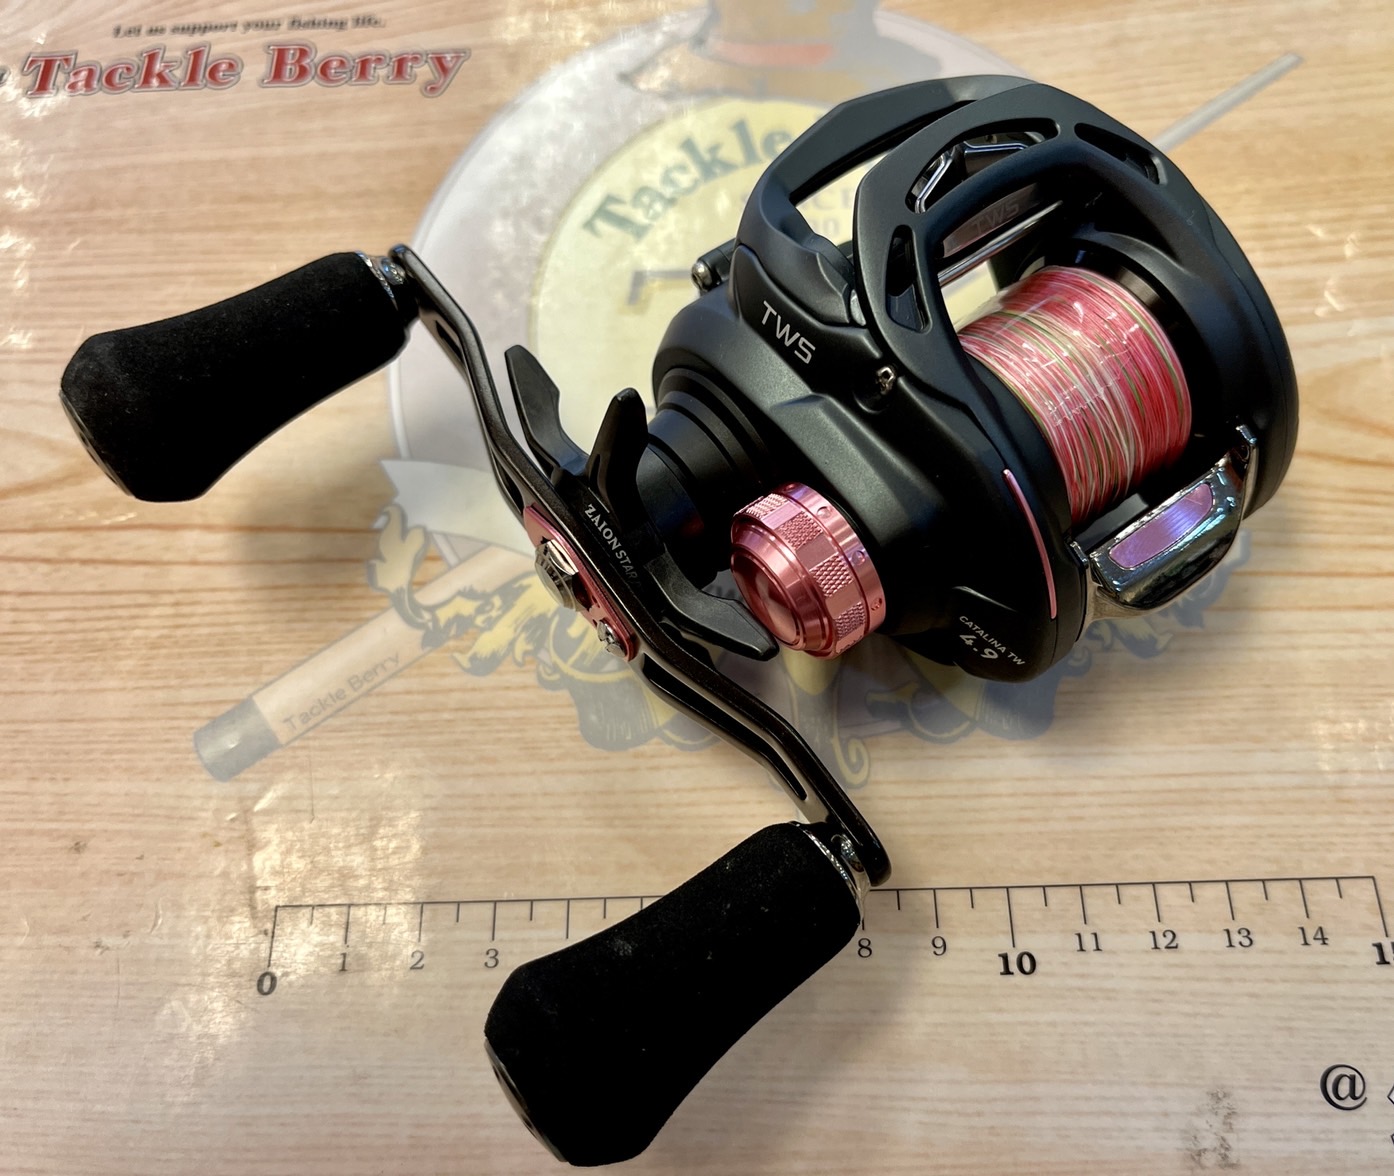 Reel | Tackle Berry